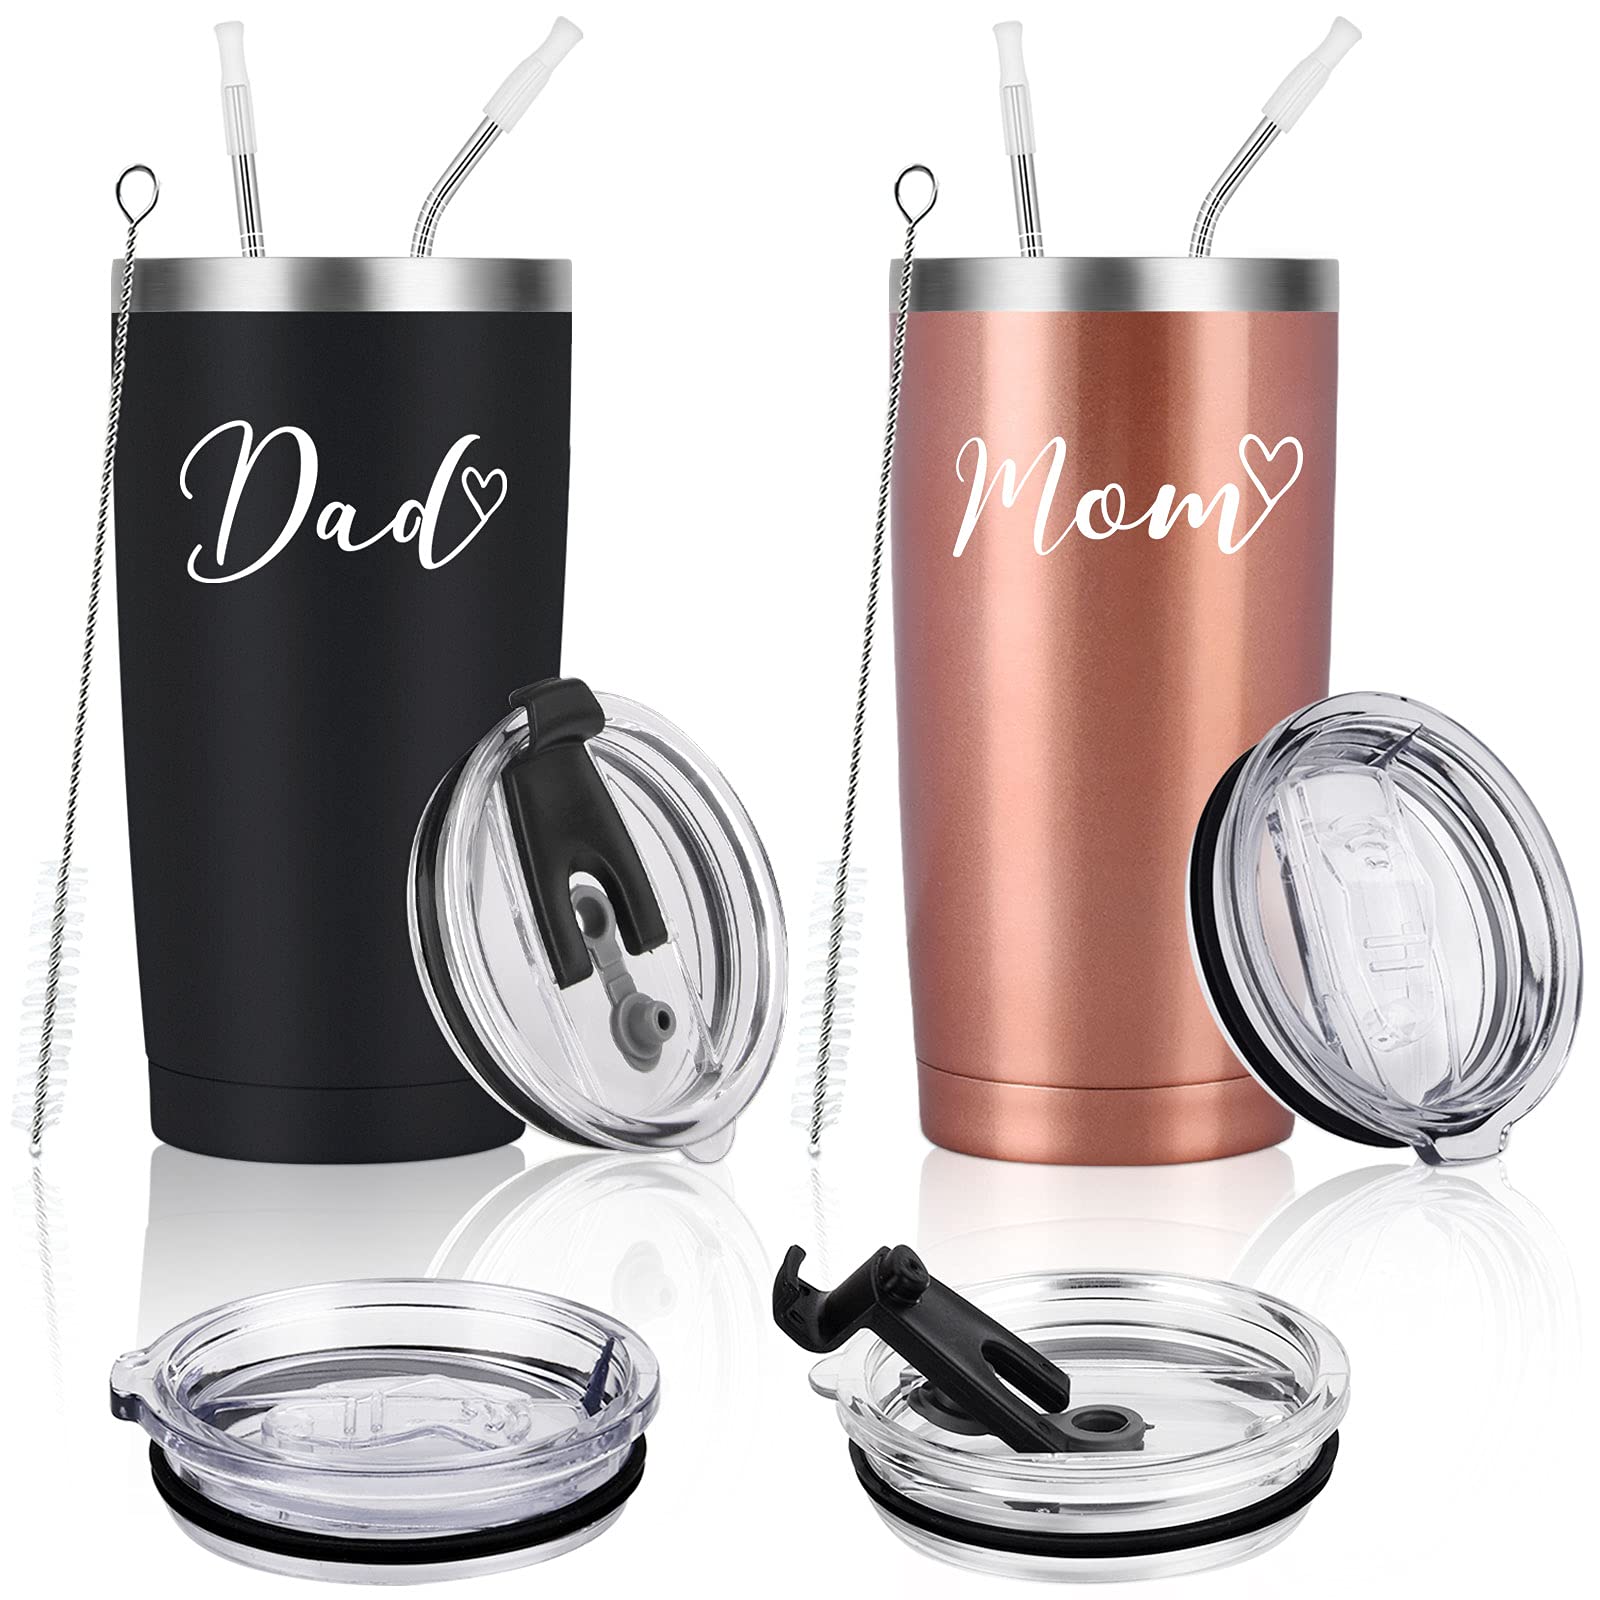 Mom and Dad Travel Tumbler Set, Funny Christmas Gifts for New Parents New Pregnancy New Dad New Mom Anniversary Birthday, Stainless Steel Insulated Travel Tumbler with 2 Lids(20oz, Black & Rose Gold)